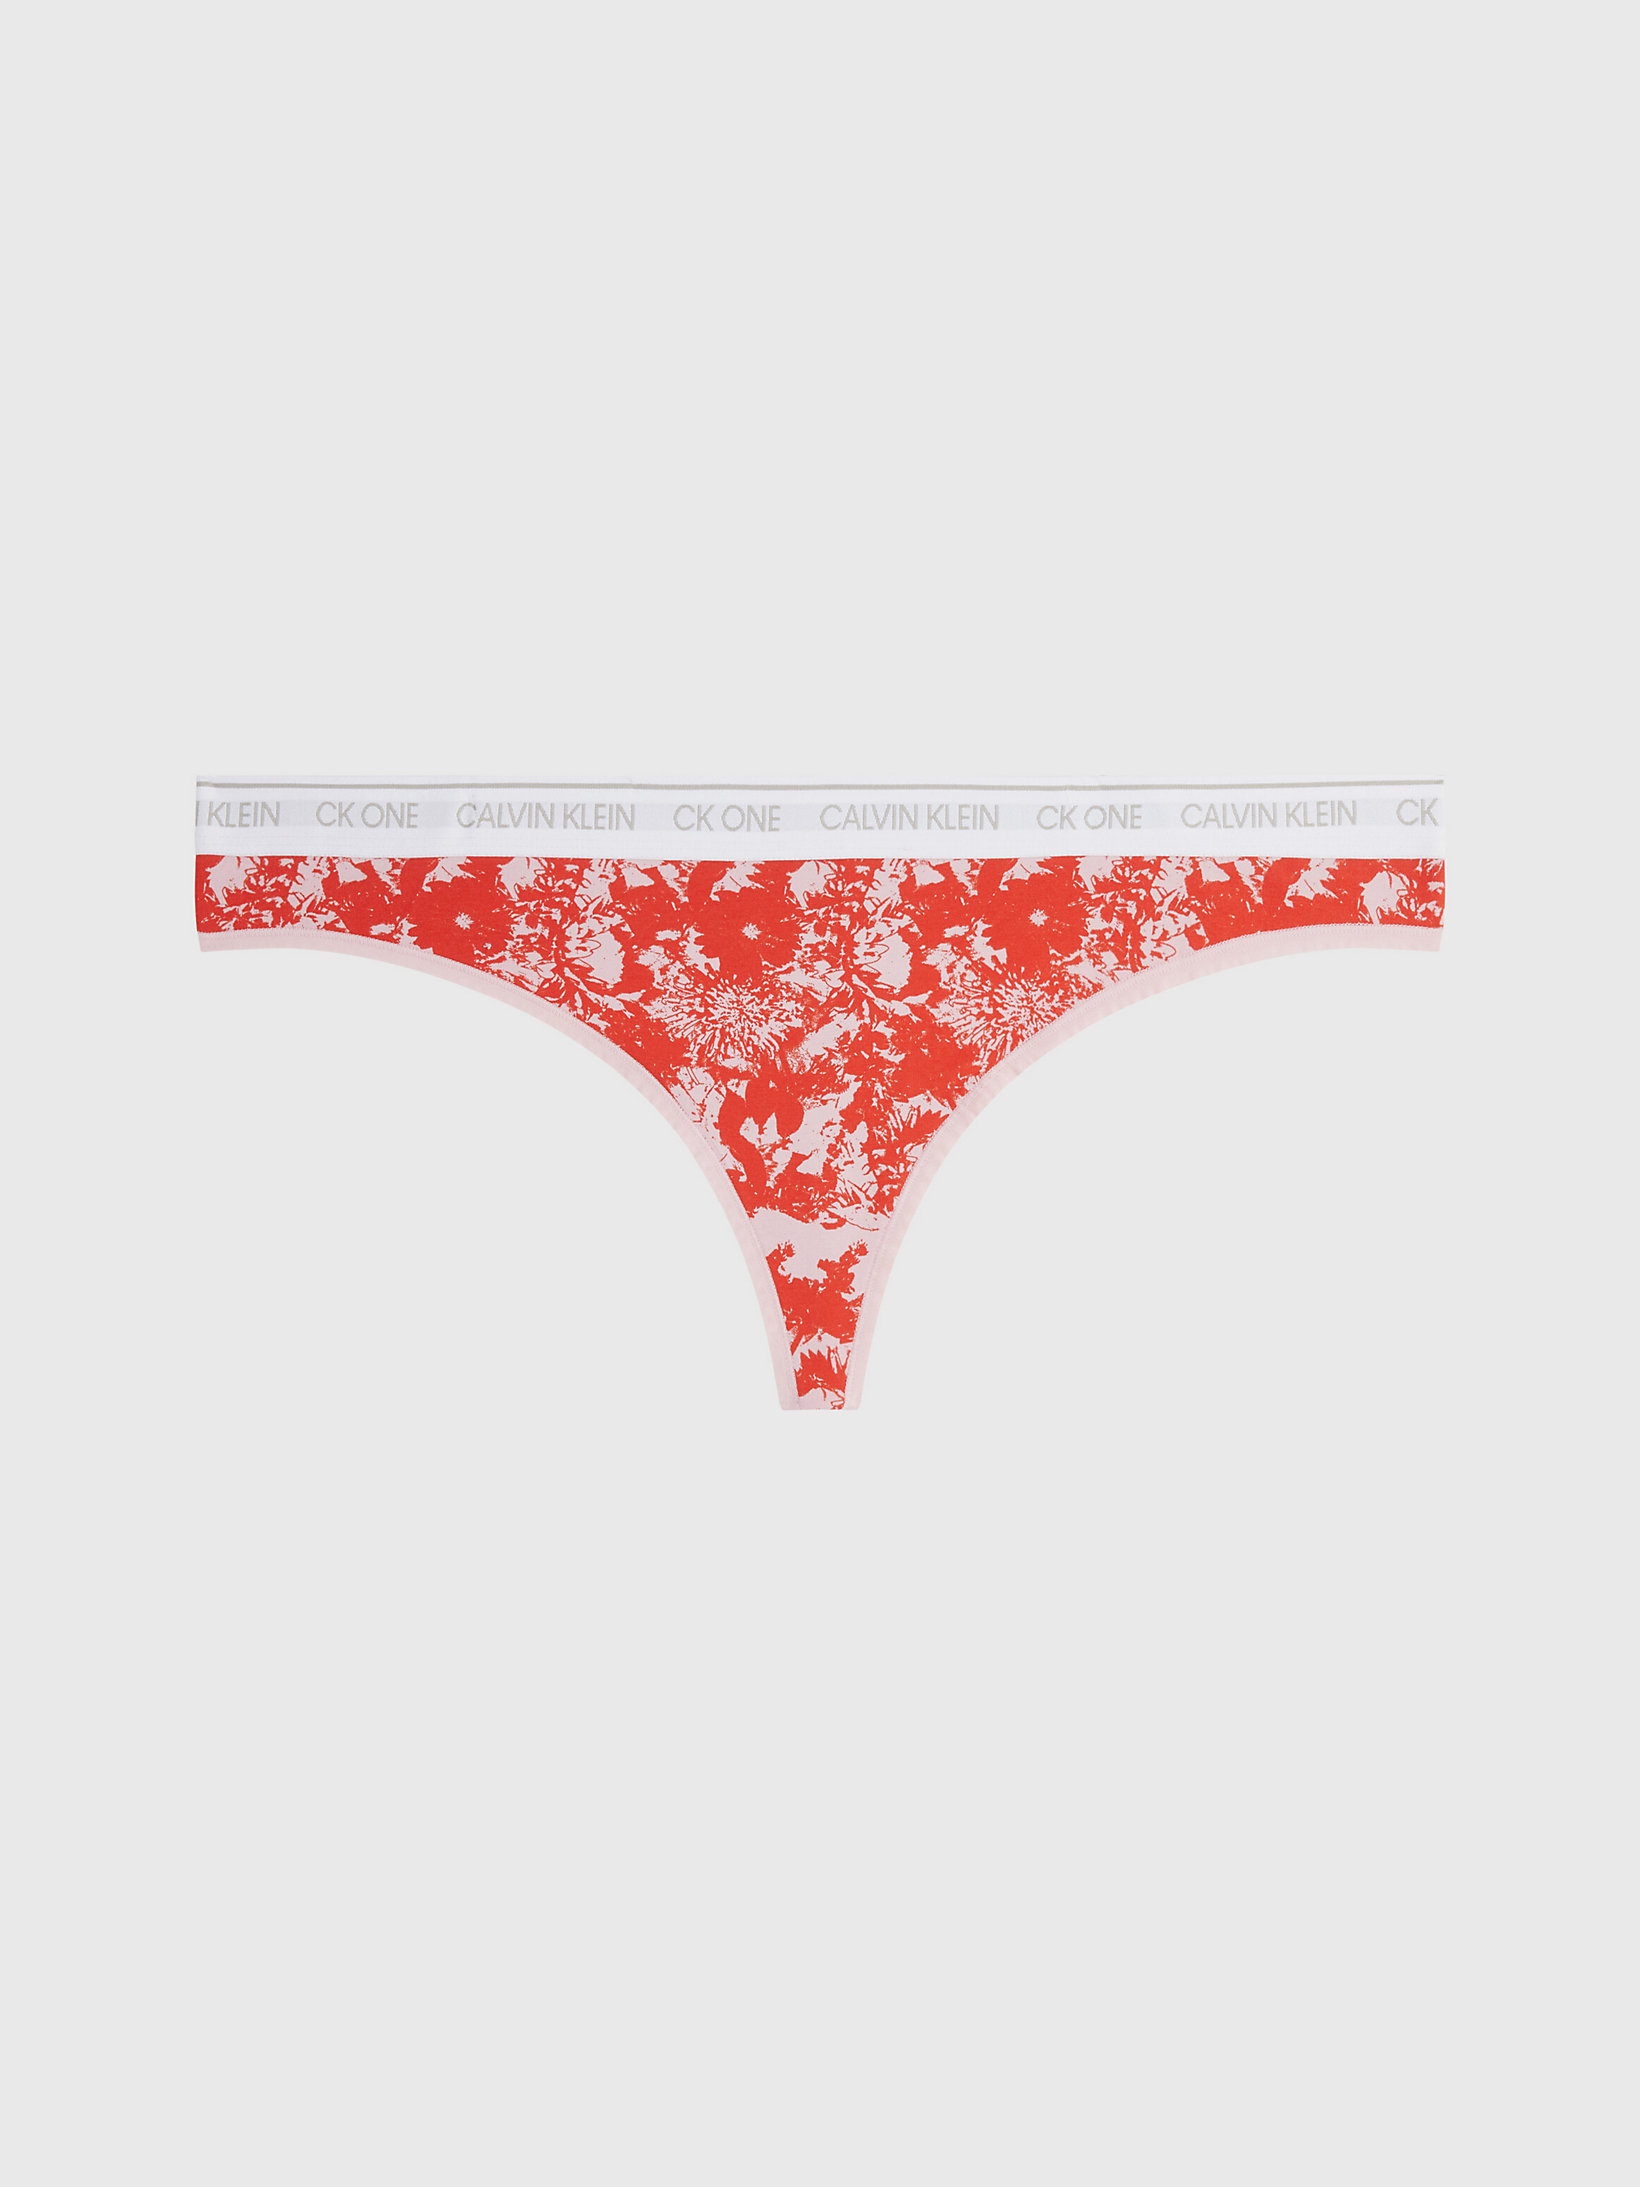 Solar Floral Print_pink Shell Plus Size Thong - CK One undefined women Calvin Klein